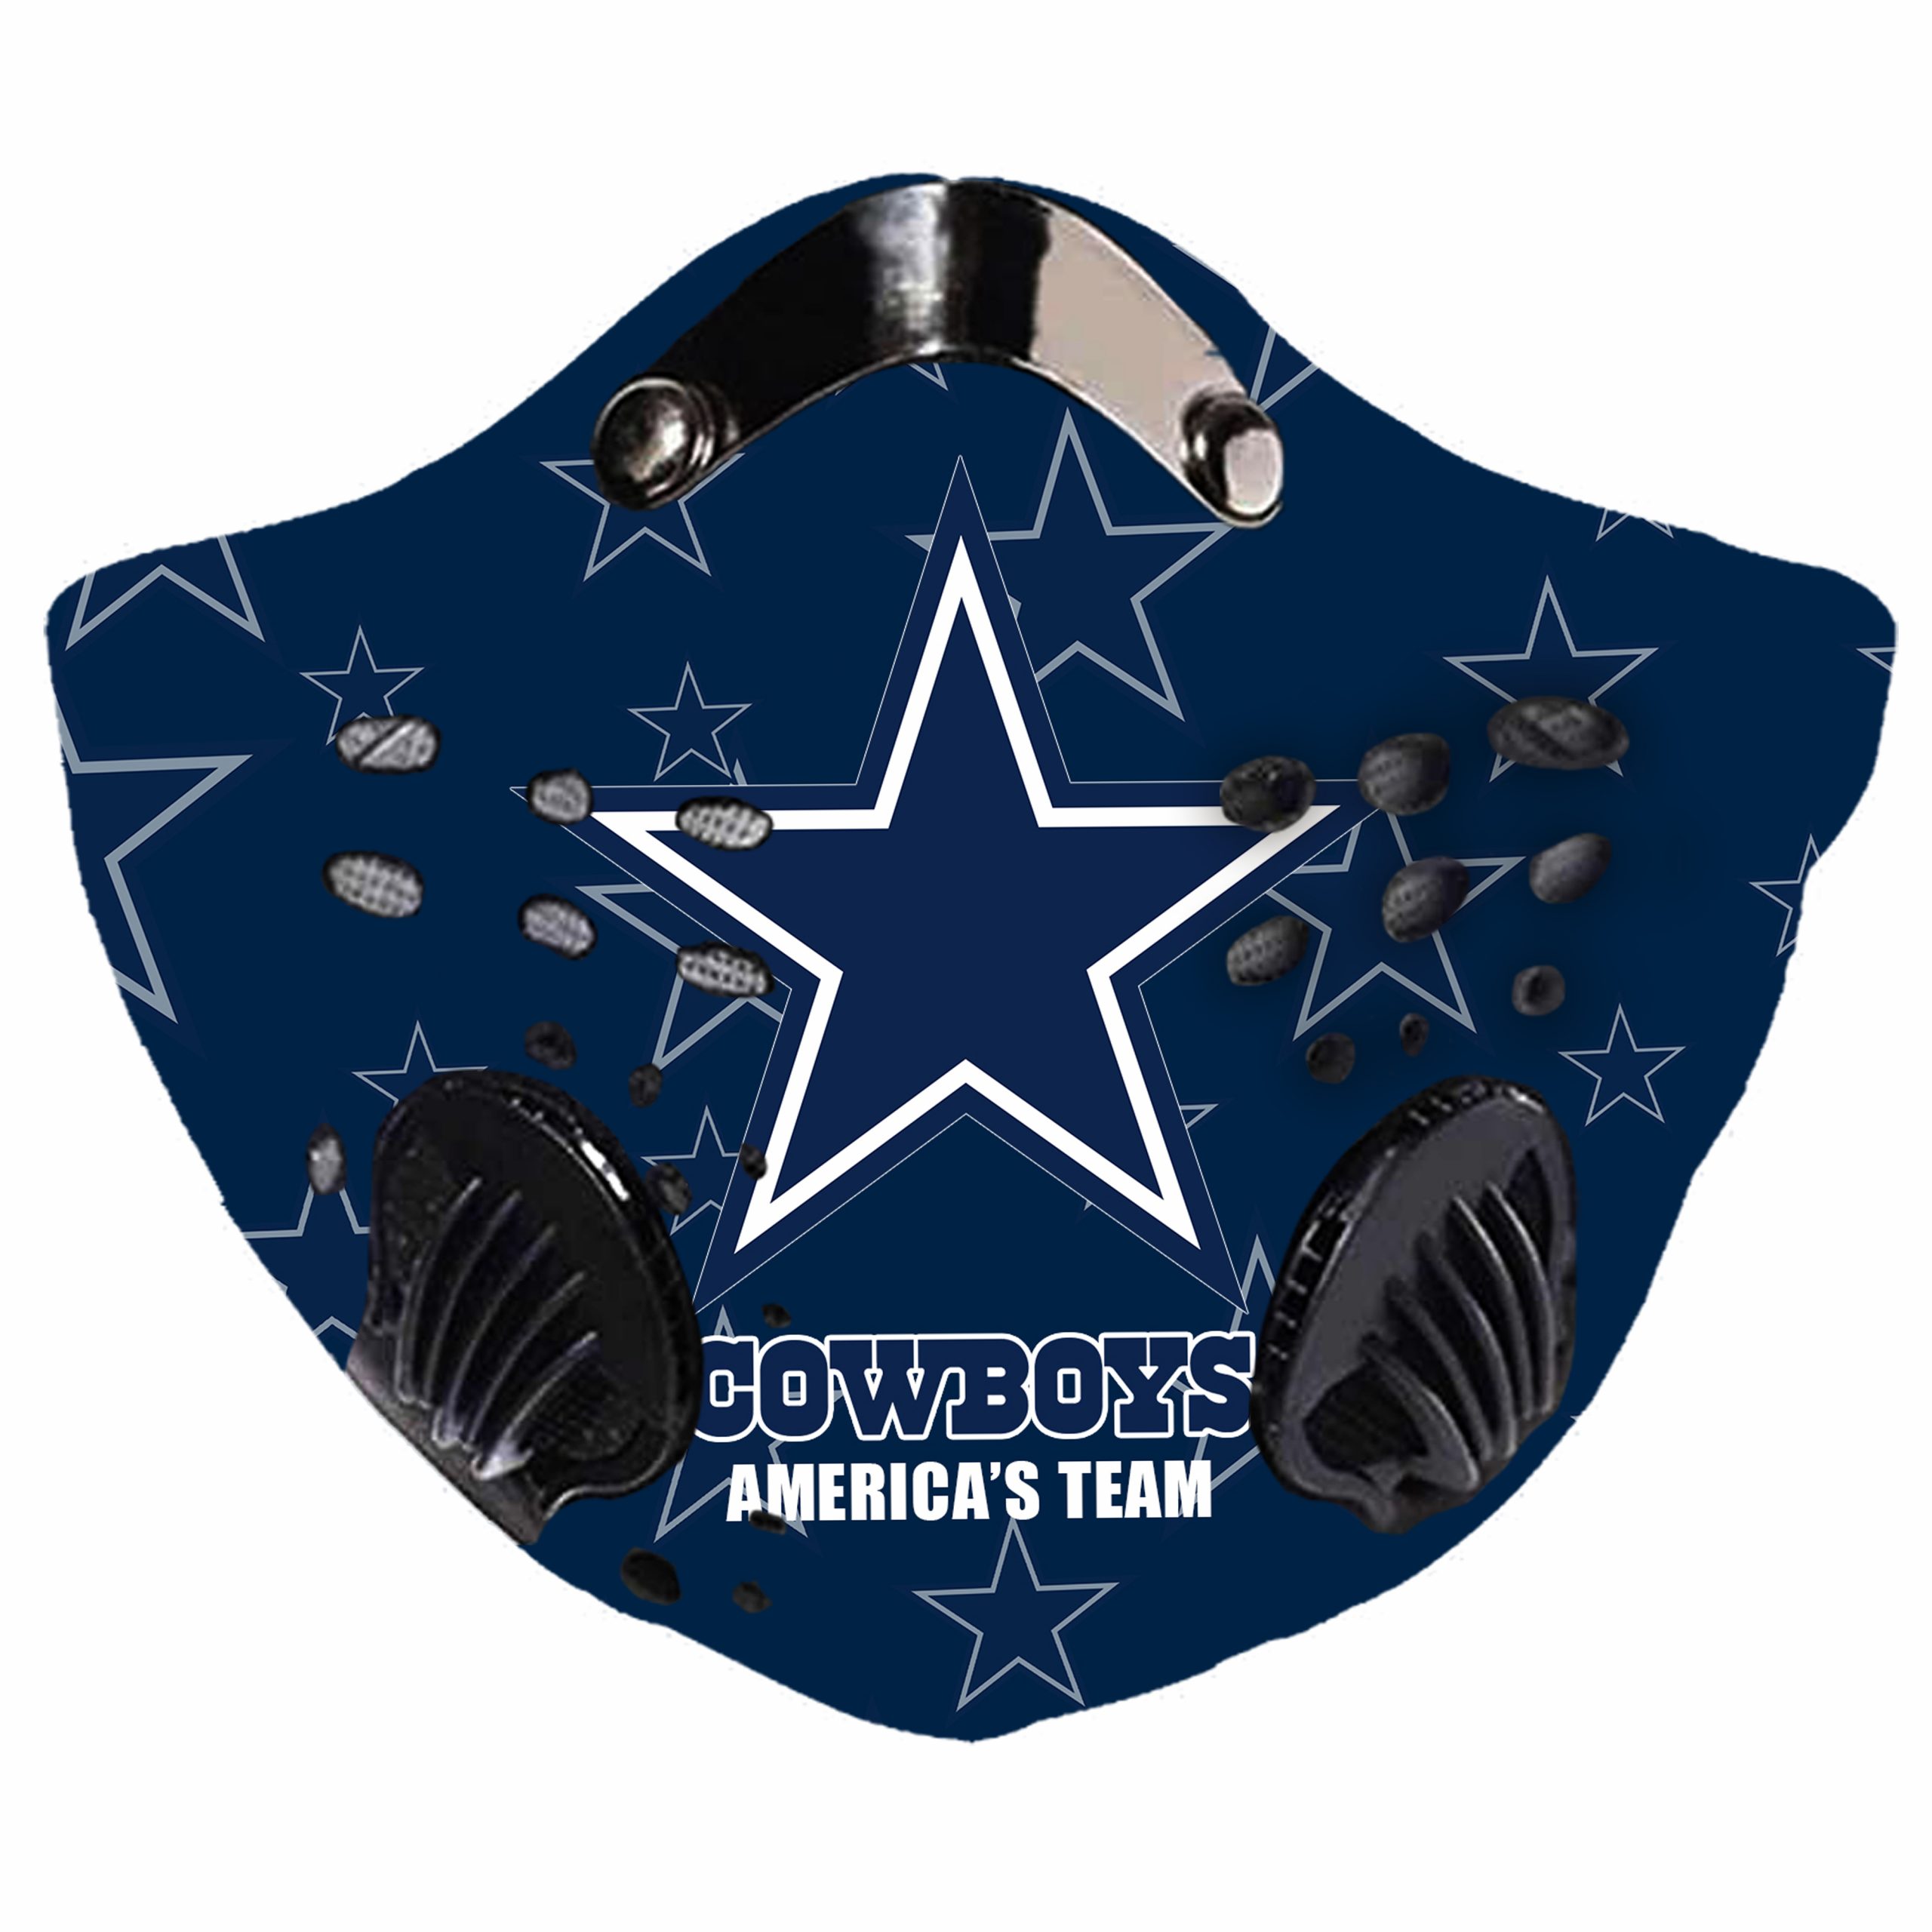 Cowboys america's team filter face mask